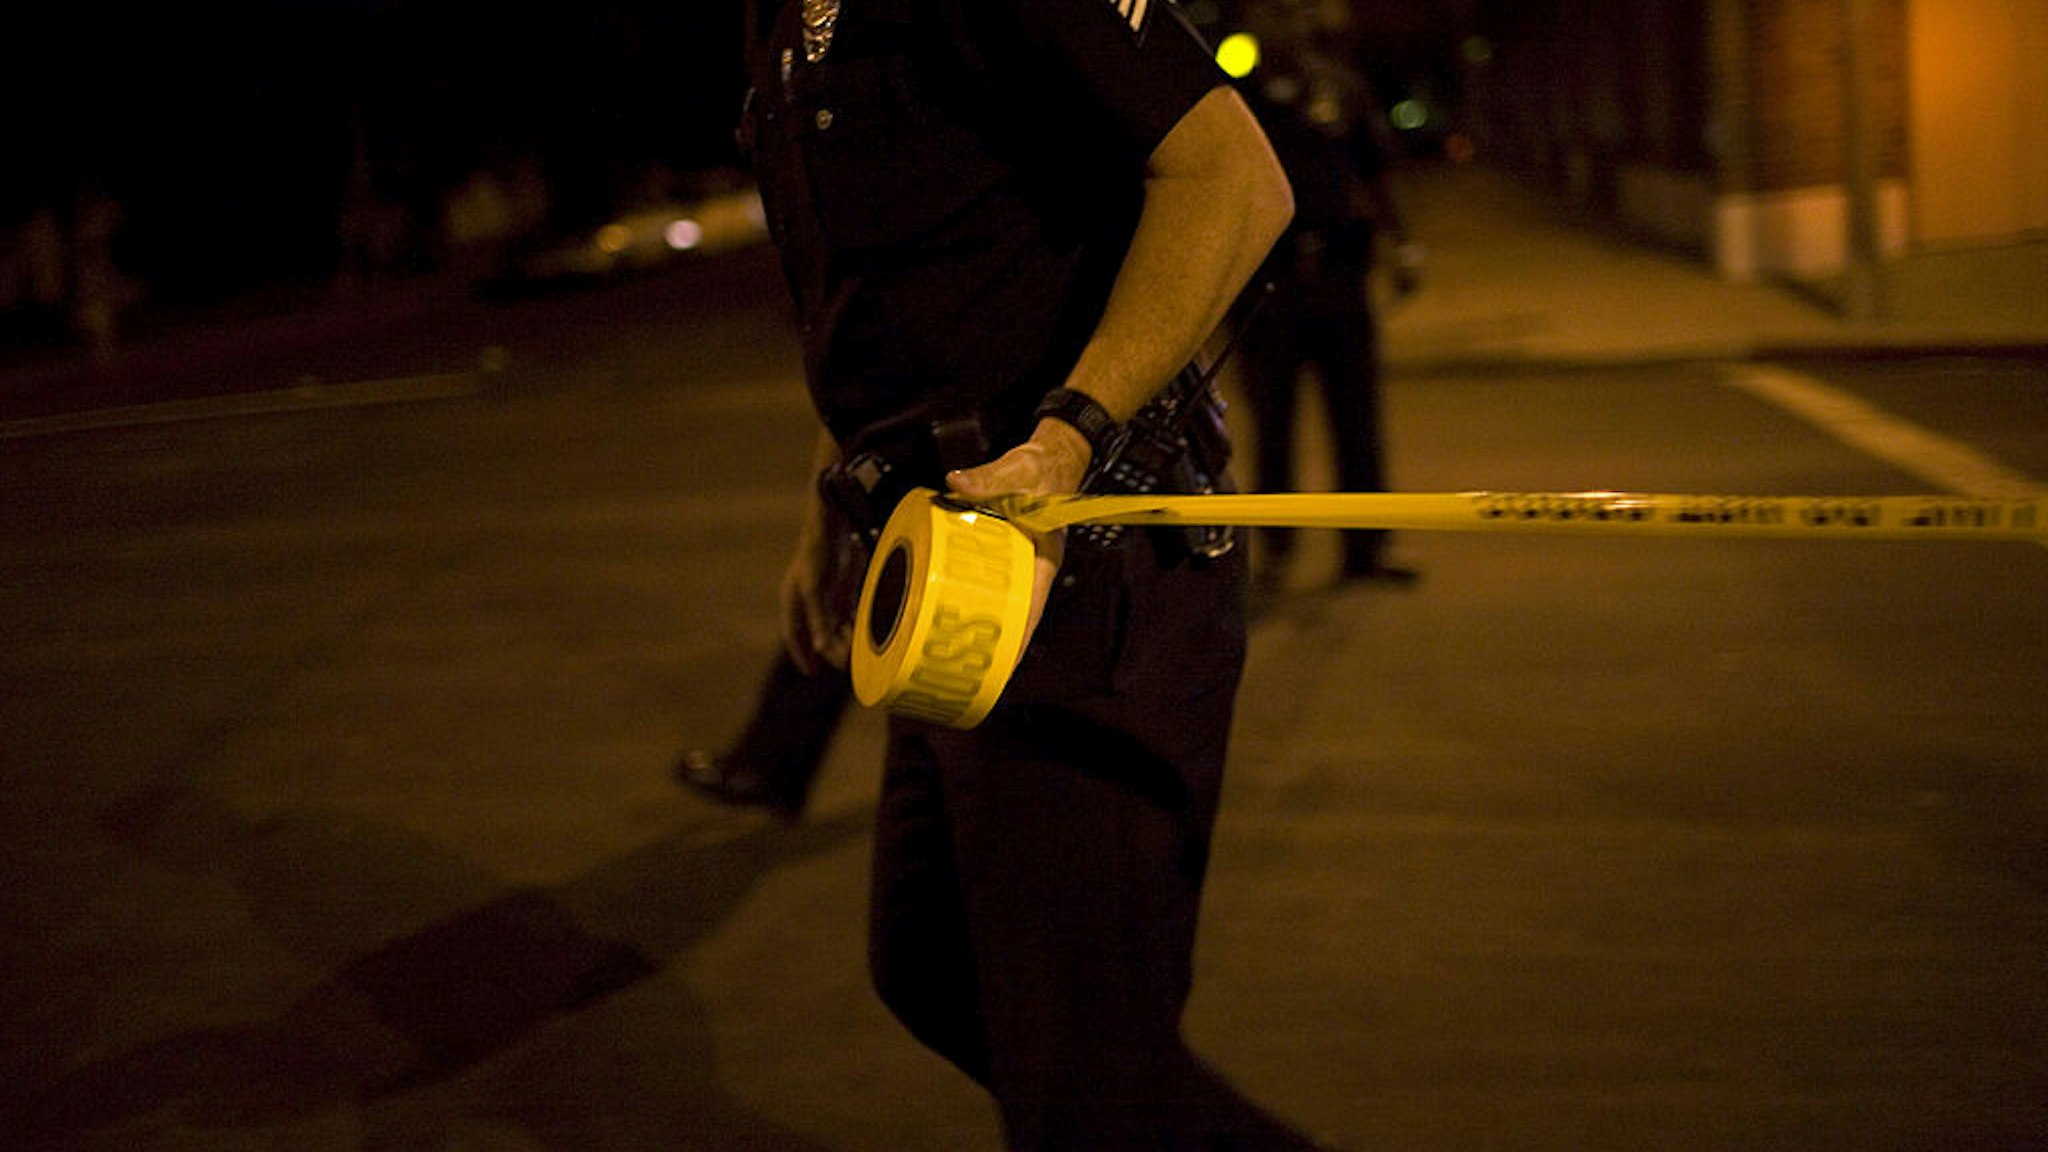 LOS ANGELES - SEPTEMBER 14: Los Angeles Police Department gang unit officers tape off a Crime Scene Investigation area following the shooting of a man September 14, 2007 in the Northeast precinct of Los Angeles, California. The injured man was taken to a nearby hospital after his assailant escaped. Police detectives questioned the victim's girlfriend, who arrived after the shooting, when a pistol was found inside her car. The LAPD gang unit is part of the Rampart police precinct where MS-13 and Hispanic street gangs have plagued local neighborhoods for decades. (Photo by Robert Nickelsberg/Getty Images)